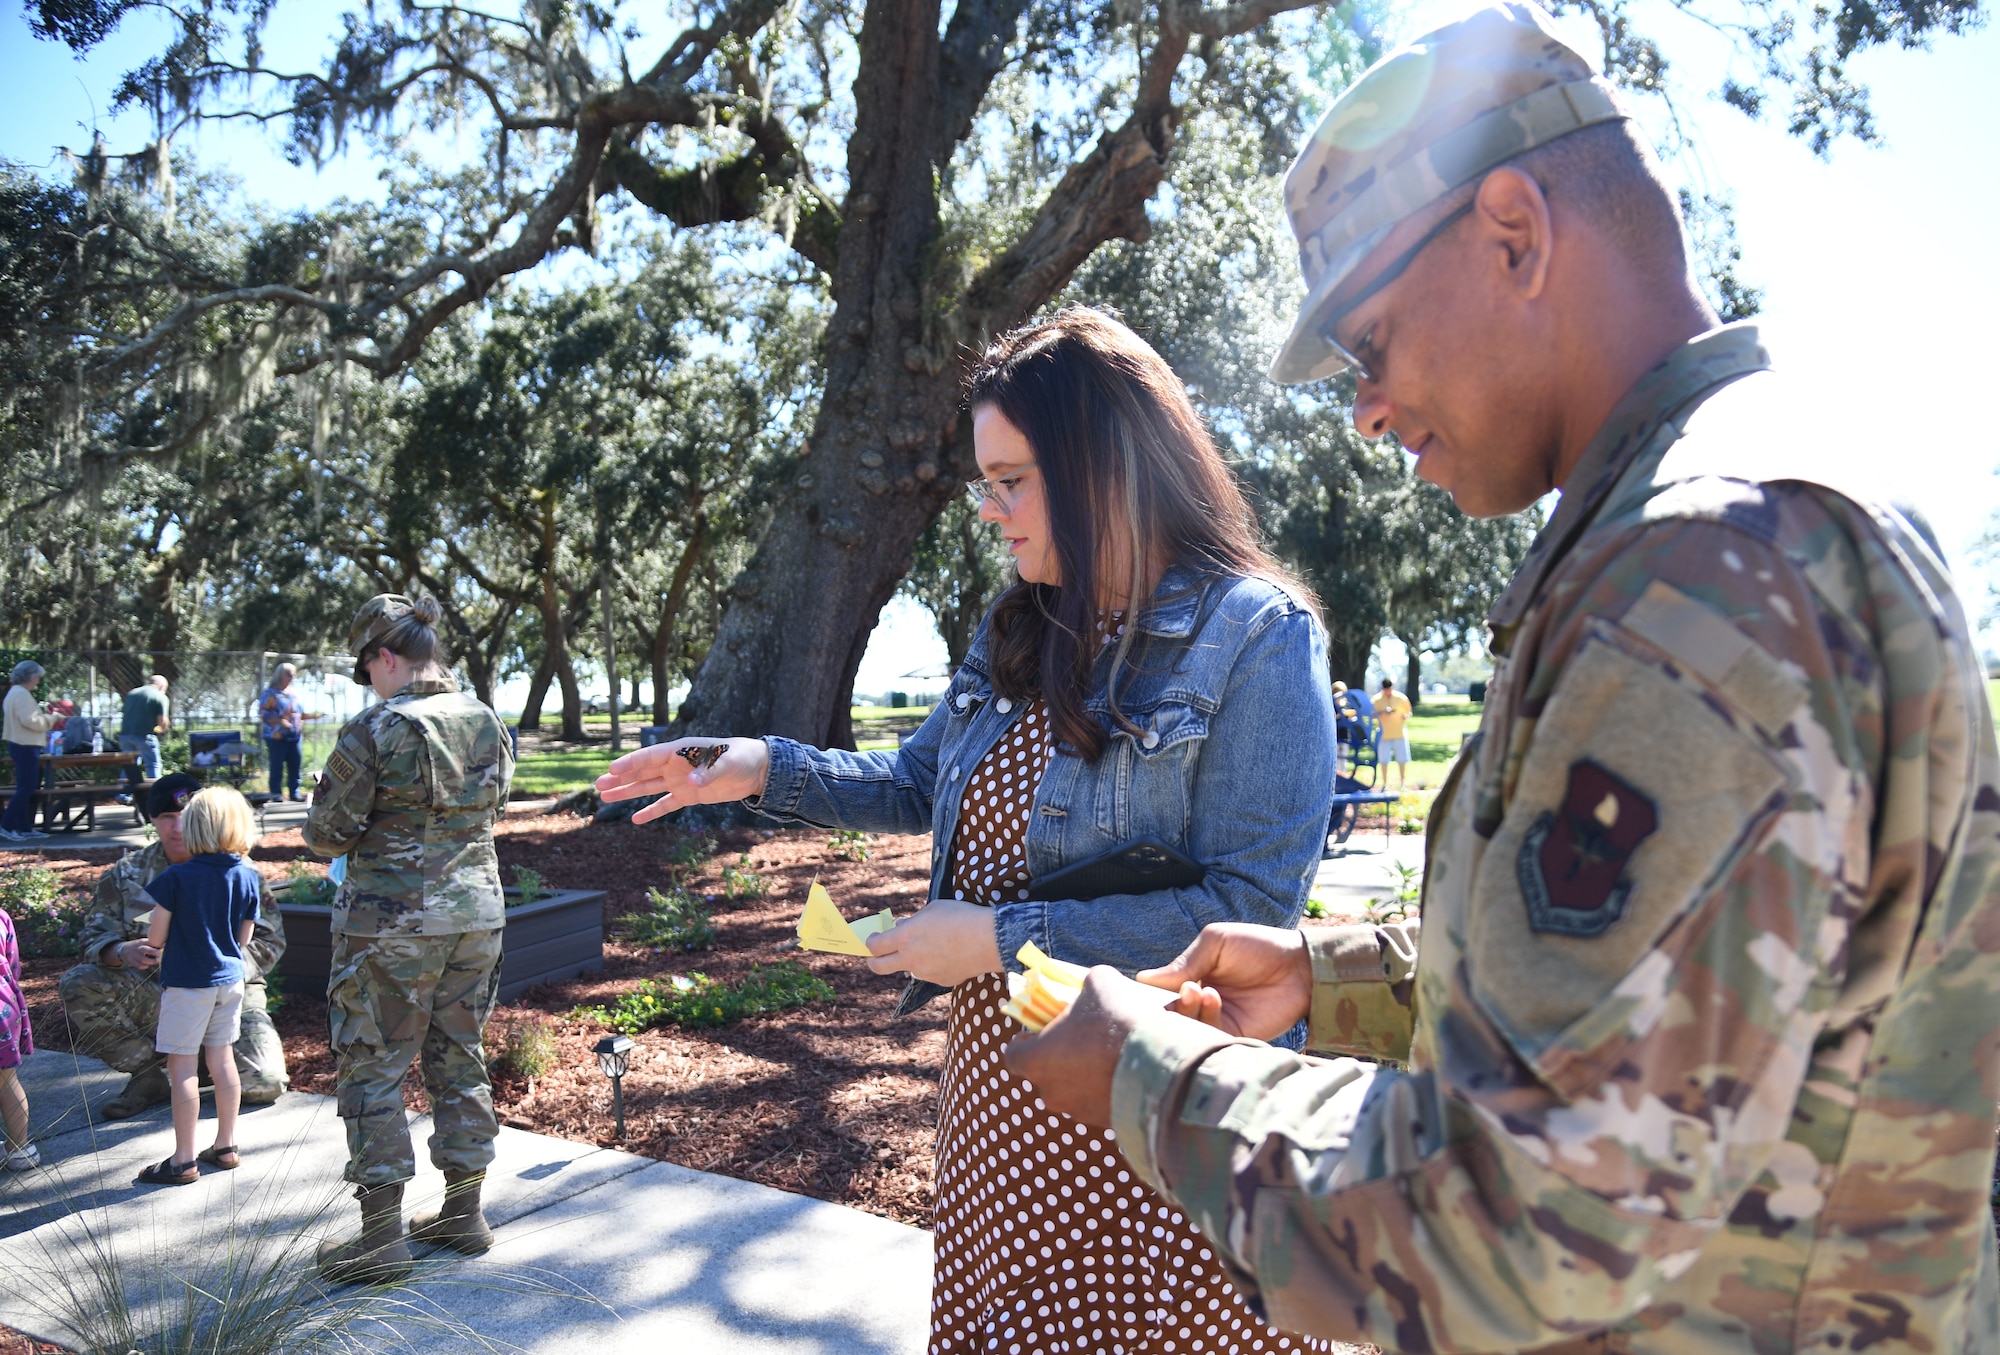 U.S. Air Force Chaplain (1st Lt.) Angel Aquino, 81st Training Wing chaplain, and his wife, Brittney Aquino, release butterflies during the Air Force Families Forever Fallen Heroes Butterfly Garden dedication ceremony at the marina park at Keesler Air Force Base, Mississippi, Sept. 24, 2021. The garden was created as a designated location where the families of our fallen heroes can find a serene area to pay tribute to their loved one as well as honoring our fallen service members. (U.S. Air Force photo by Kemberly Groue)